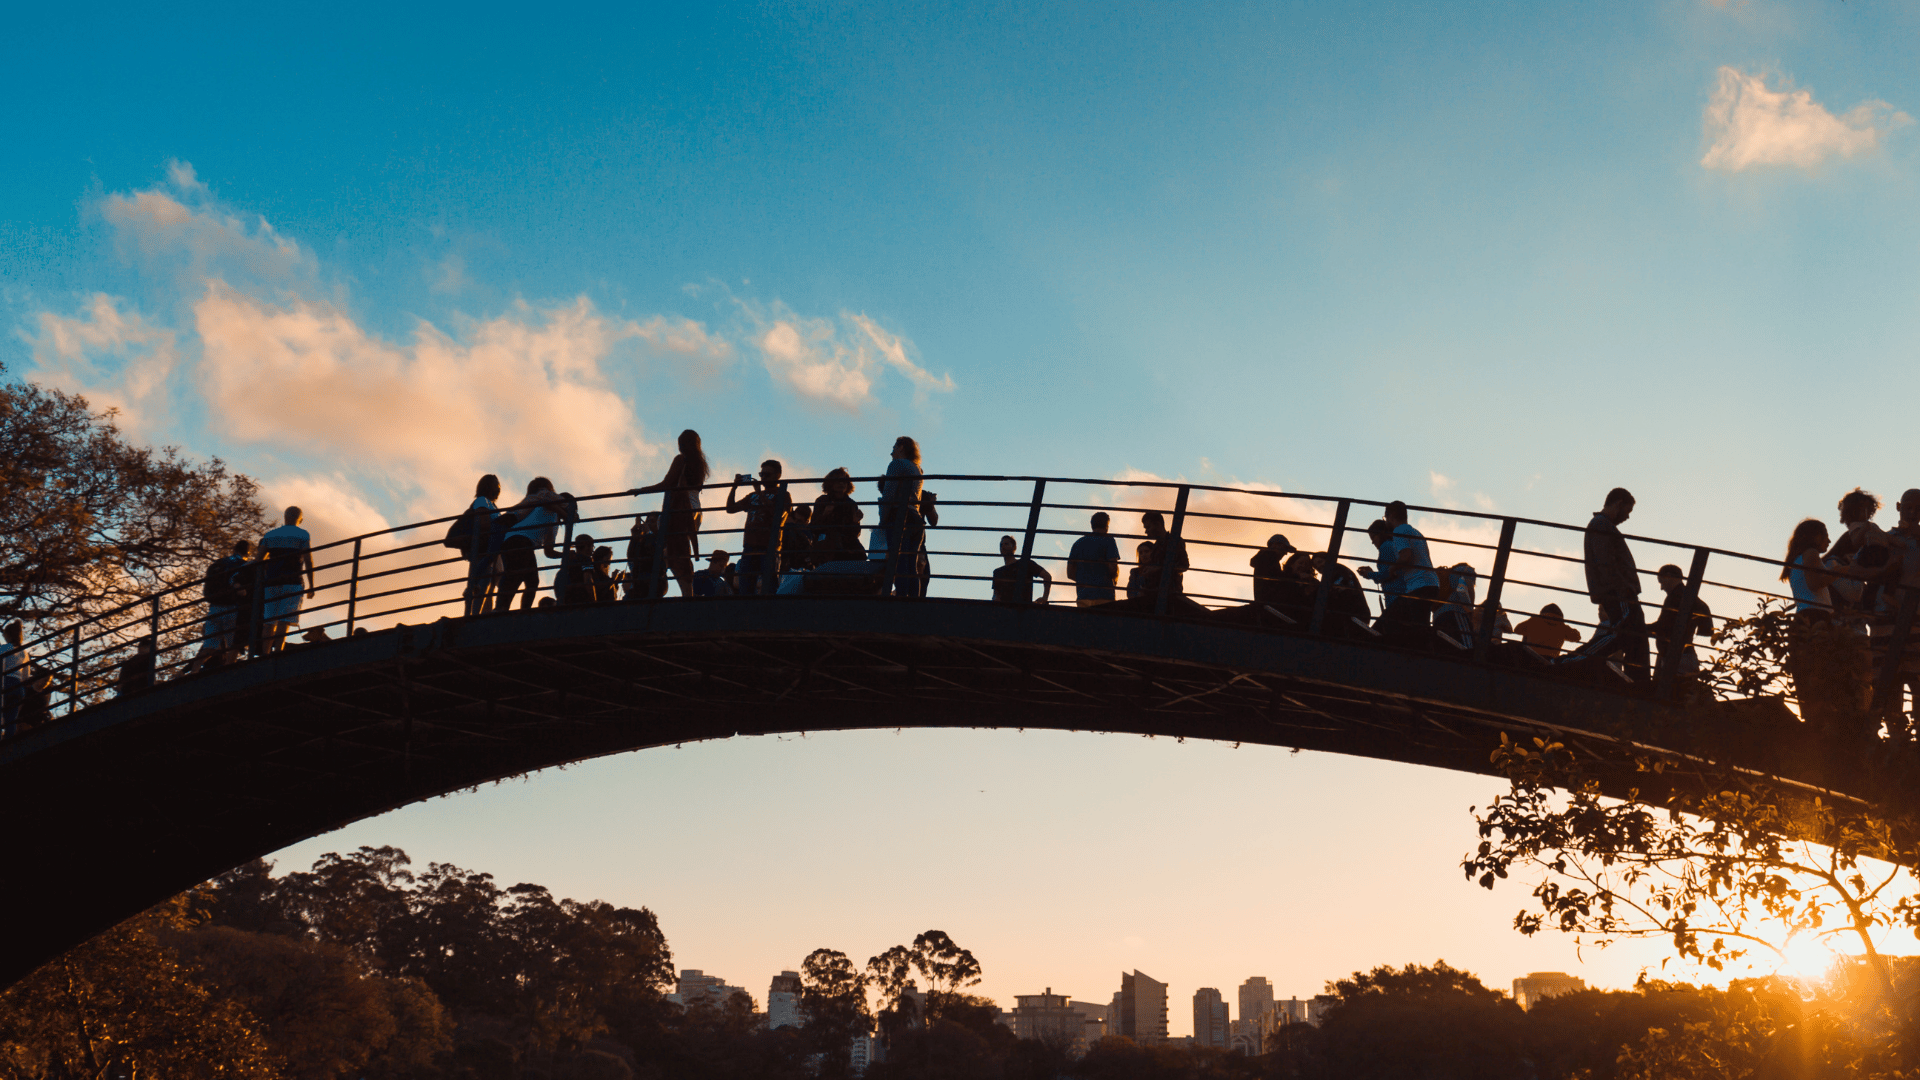 Silhouettes of people on bridge at sunset